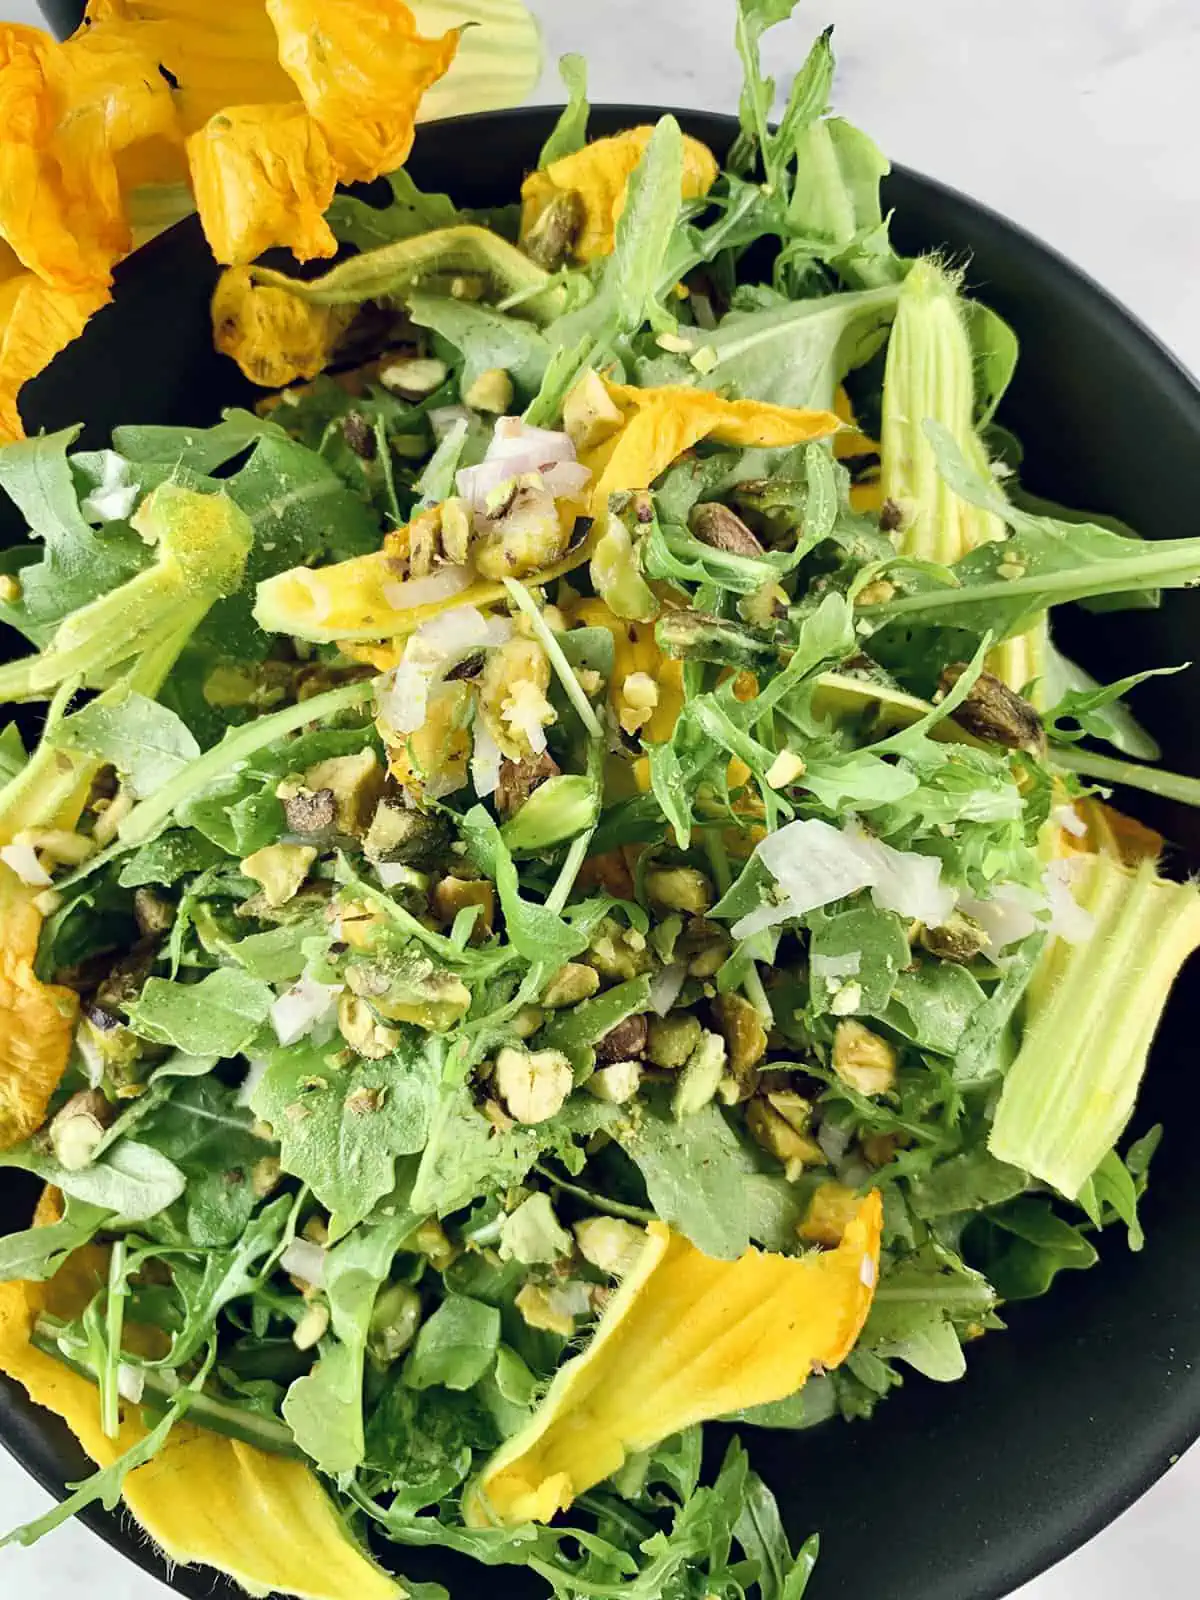 Close-up of arugula salad with squash flowers with zucchini flowers on the side.